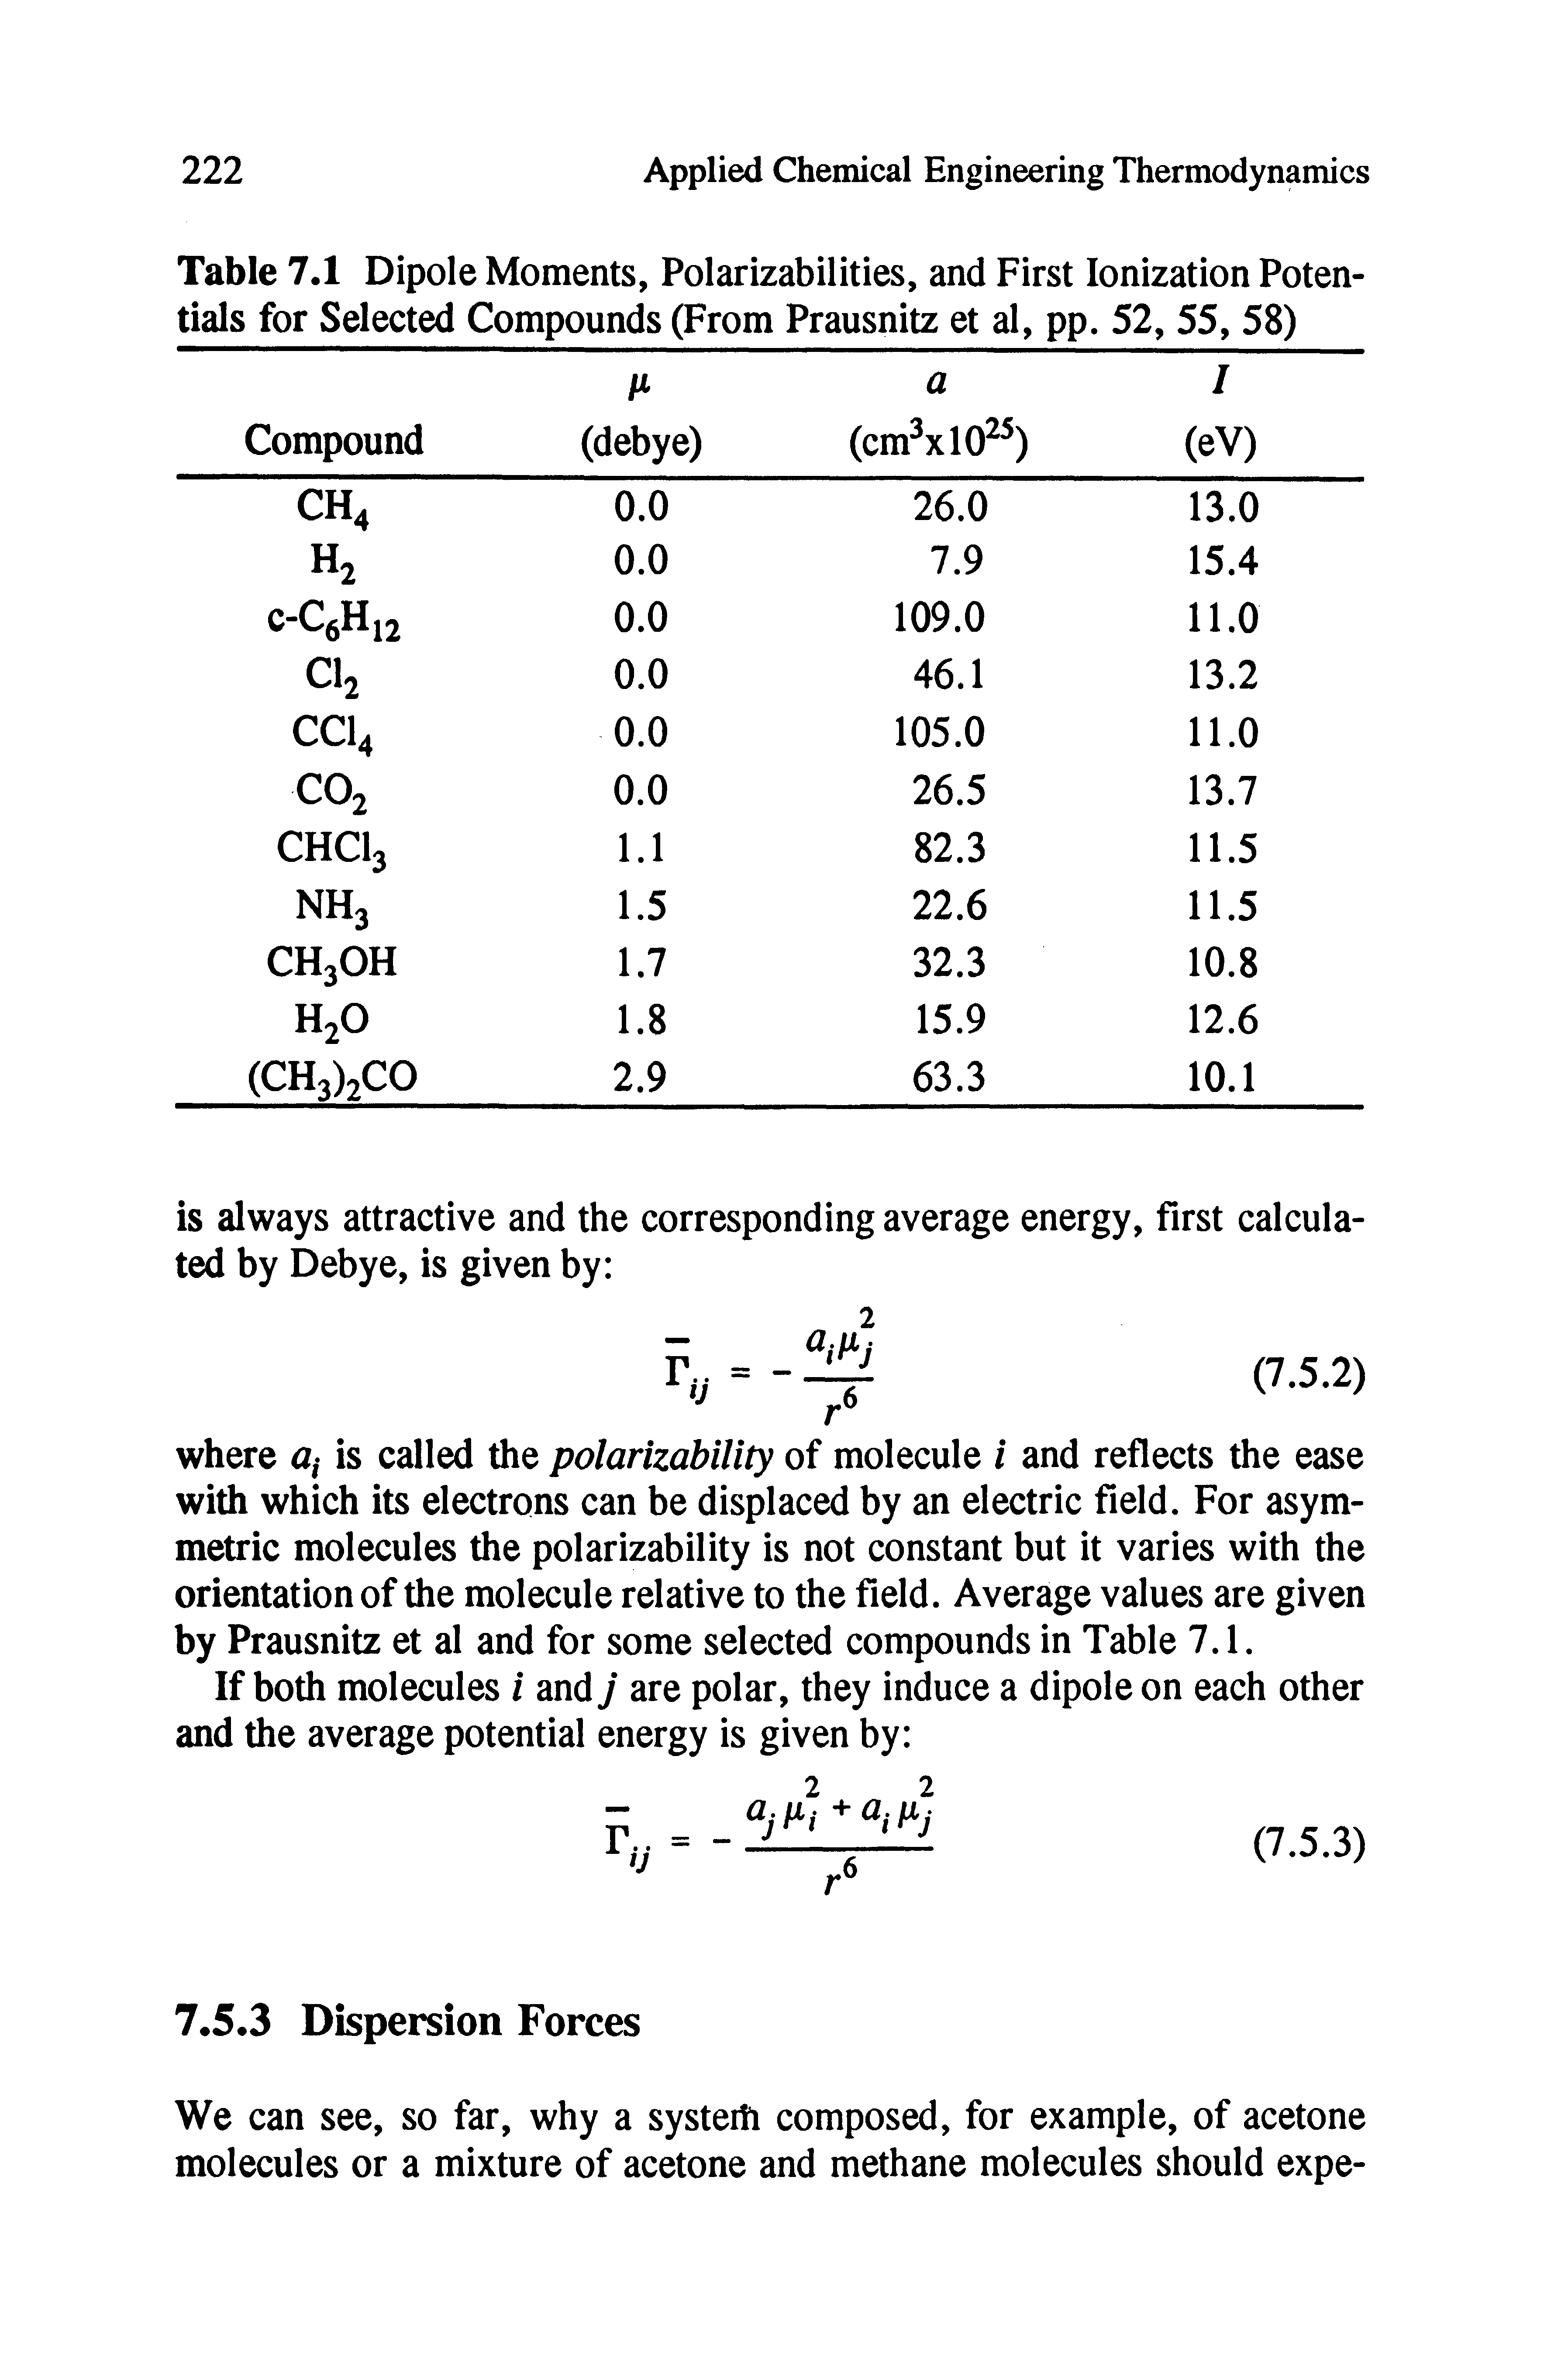 Table 7.1 Dipole Moments, Polarizabilities, and First Ionization Potentials for Selected Compounds (From Prausnitz et al, pp. 52, 55, 58)...